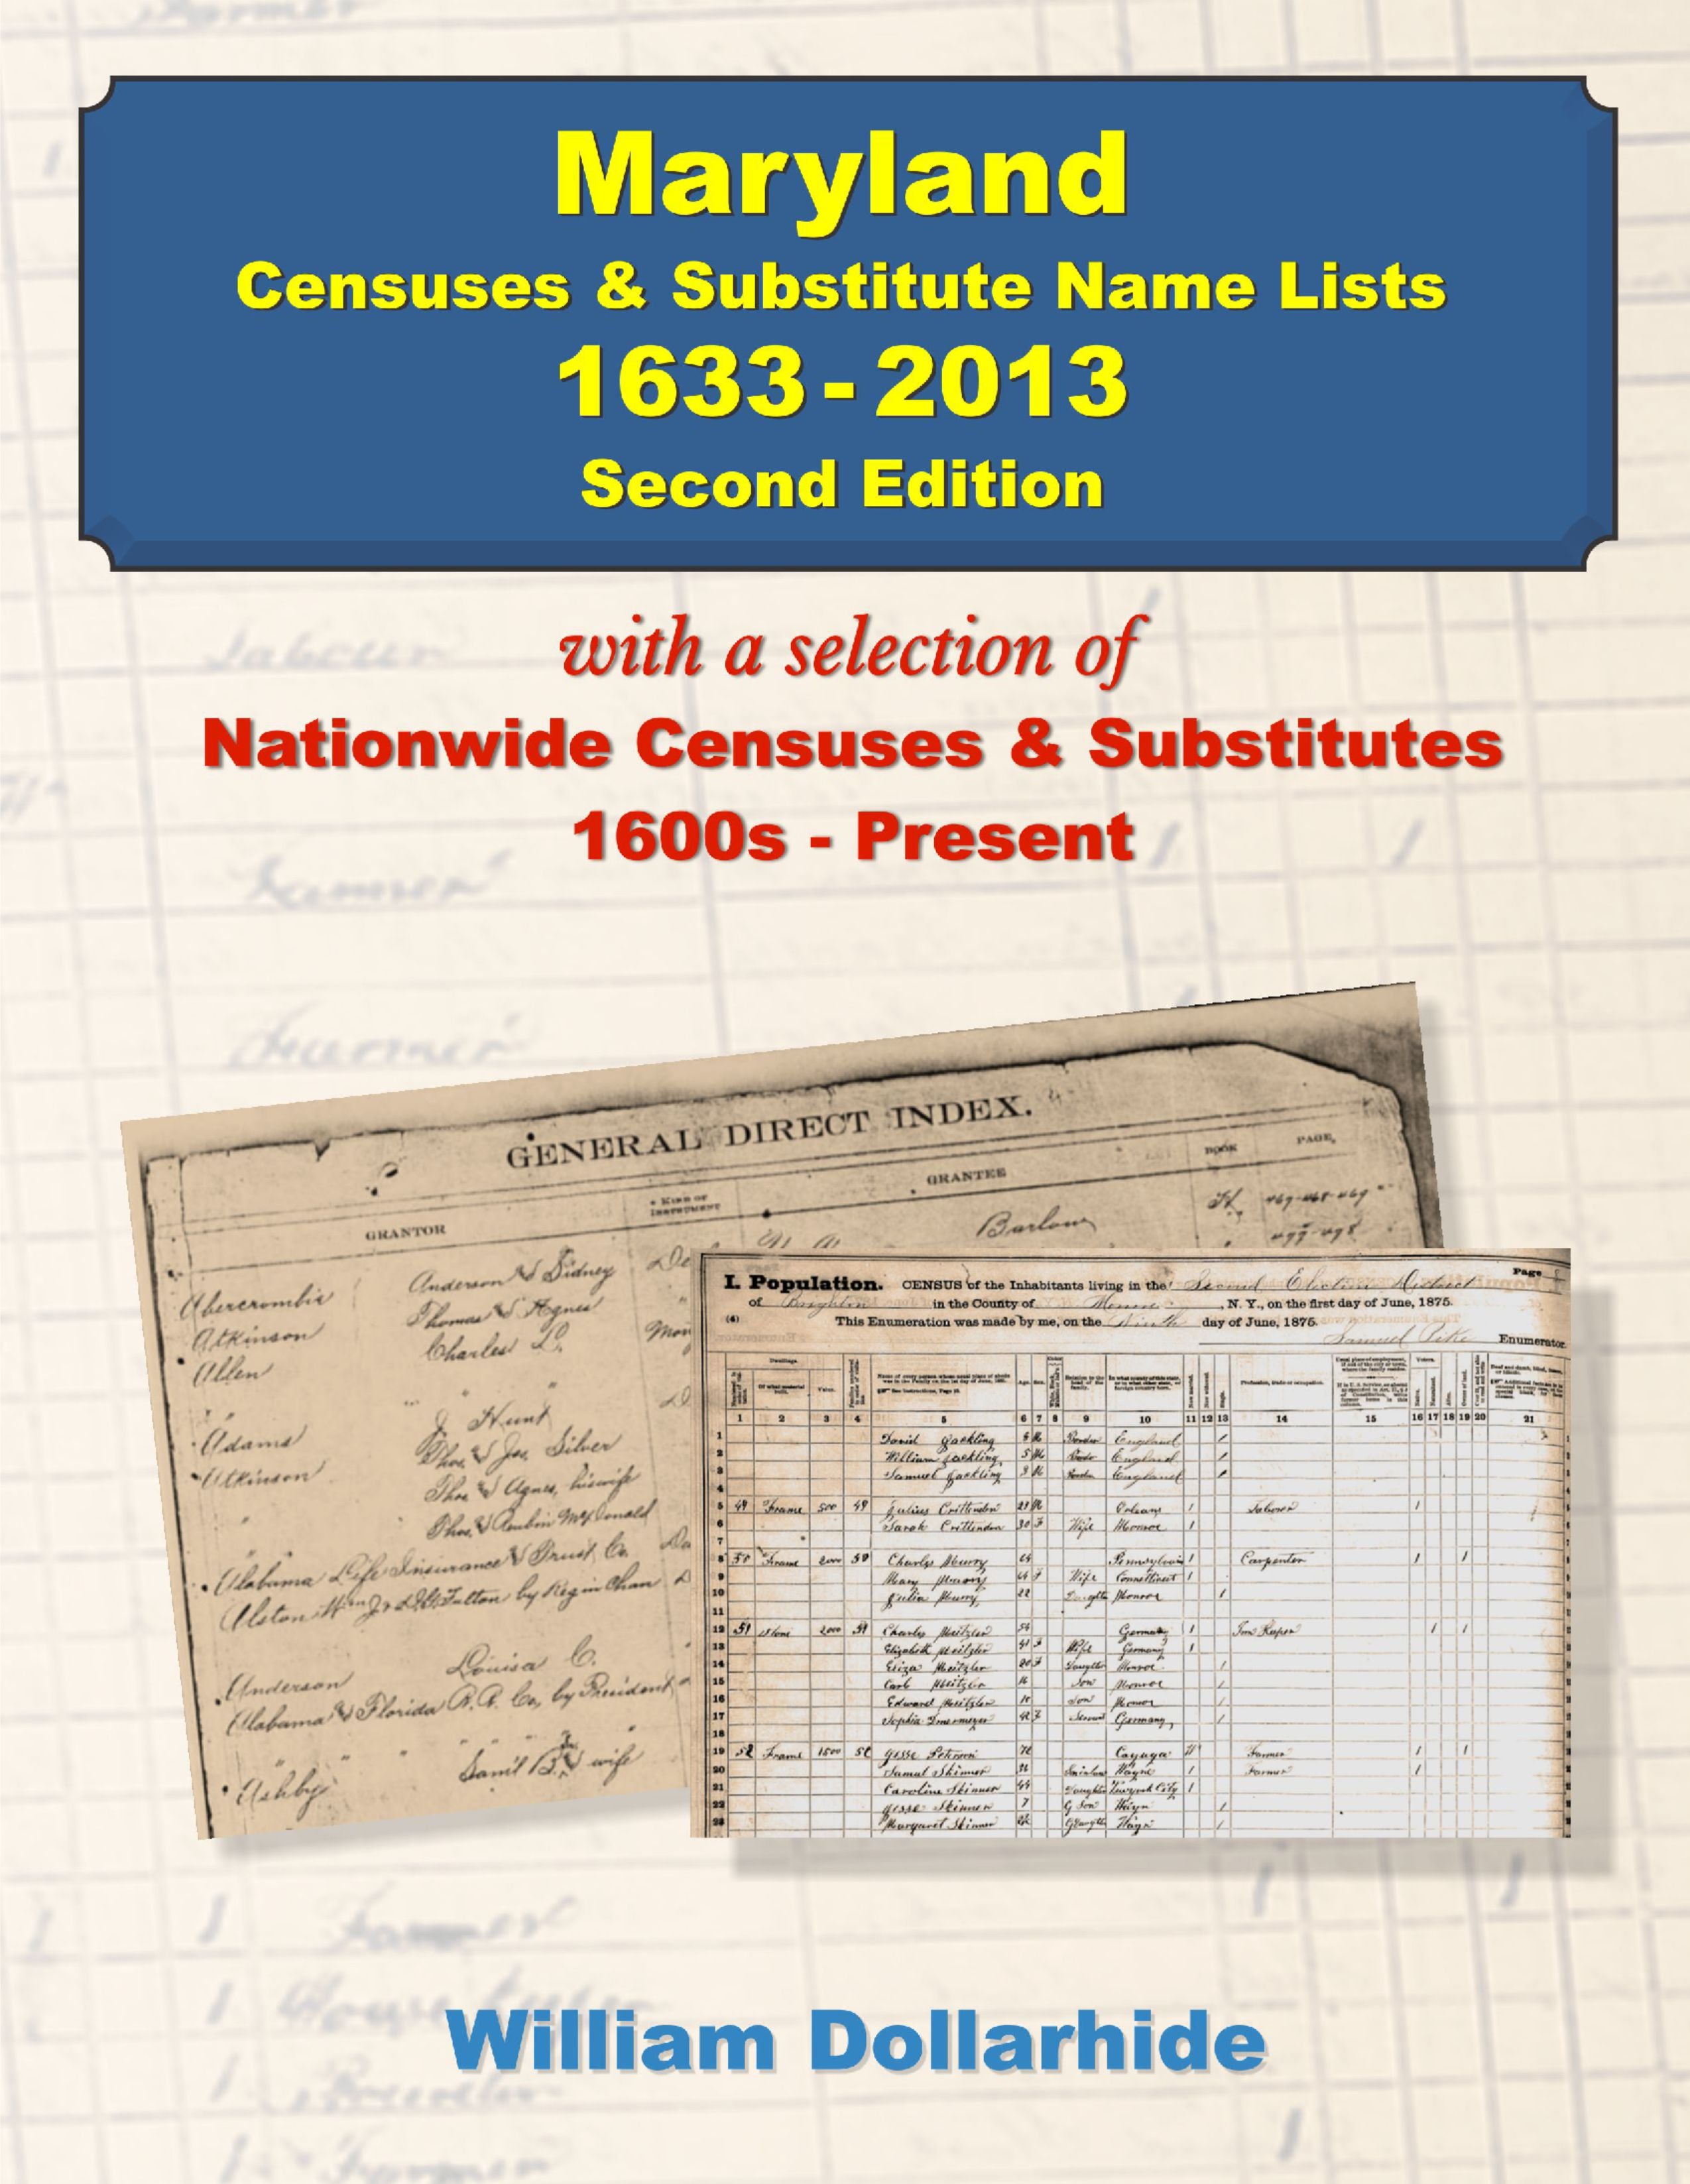 Maryland Censuses & Substitute Name Lists 1633-2013 - Second Edition - SOFTBOUND